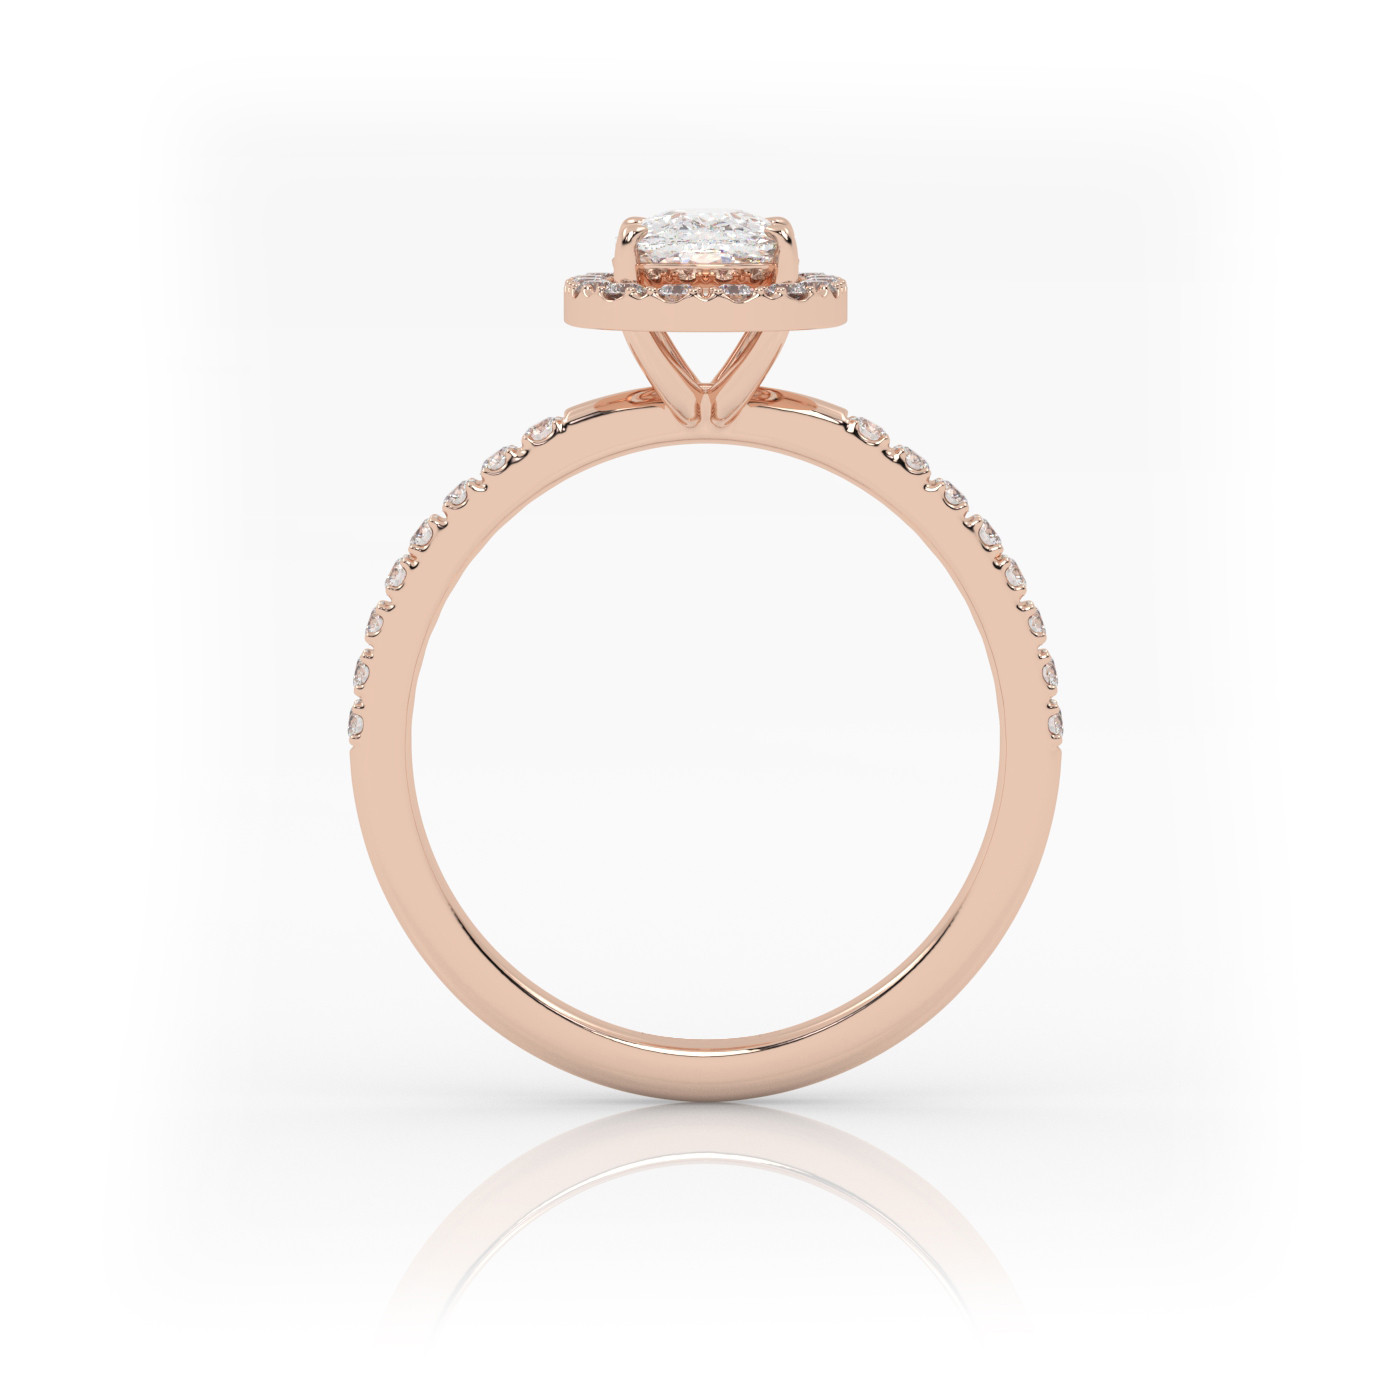 18K ROSE GOLD Elongated Cushion Diamond Engagement Ring With Pave and Halo Style